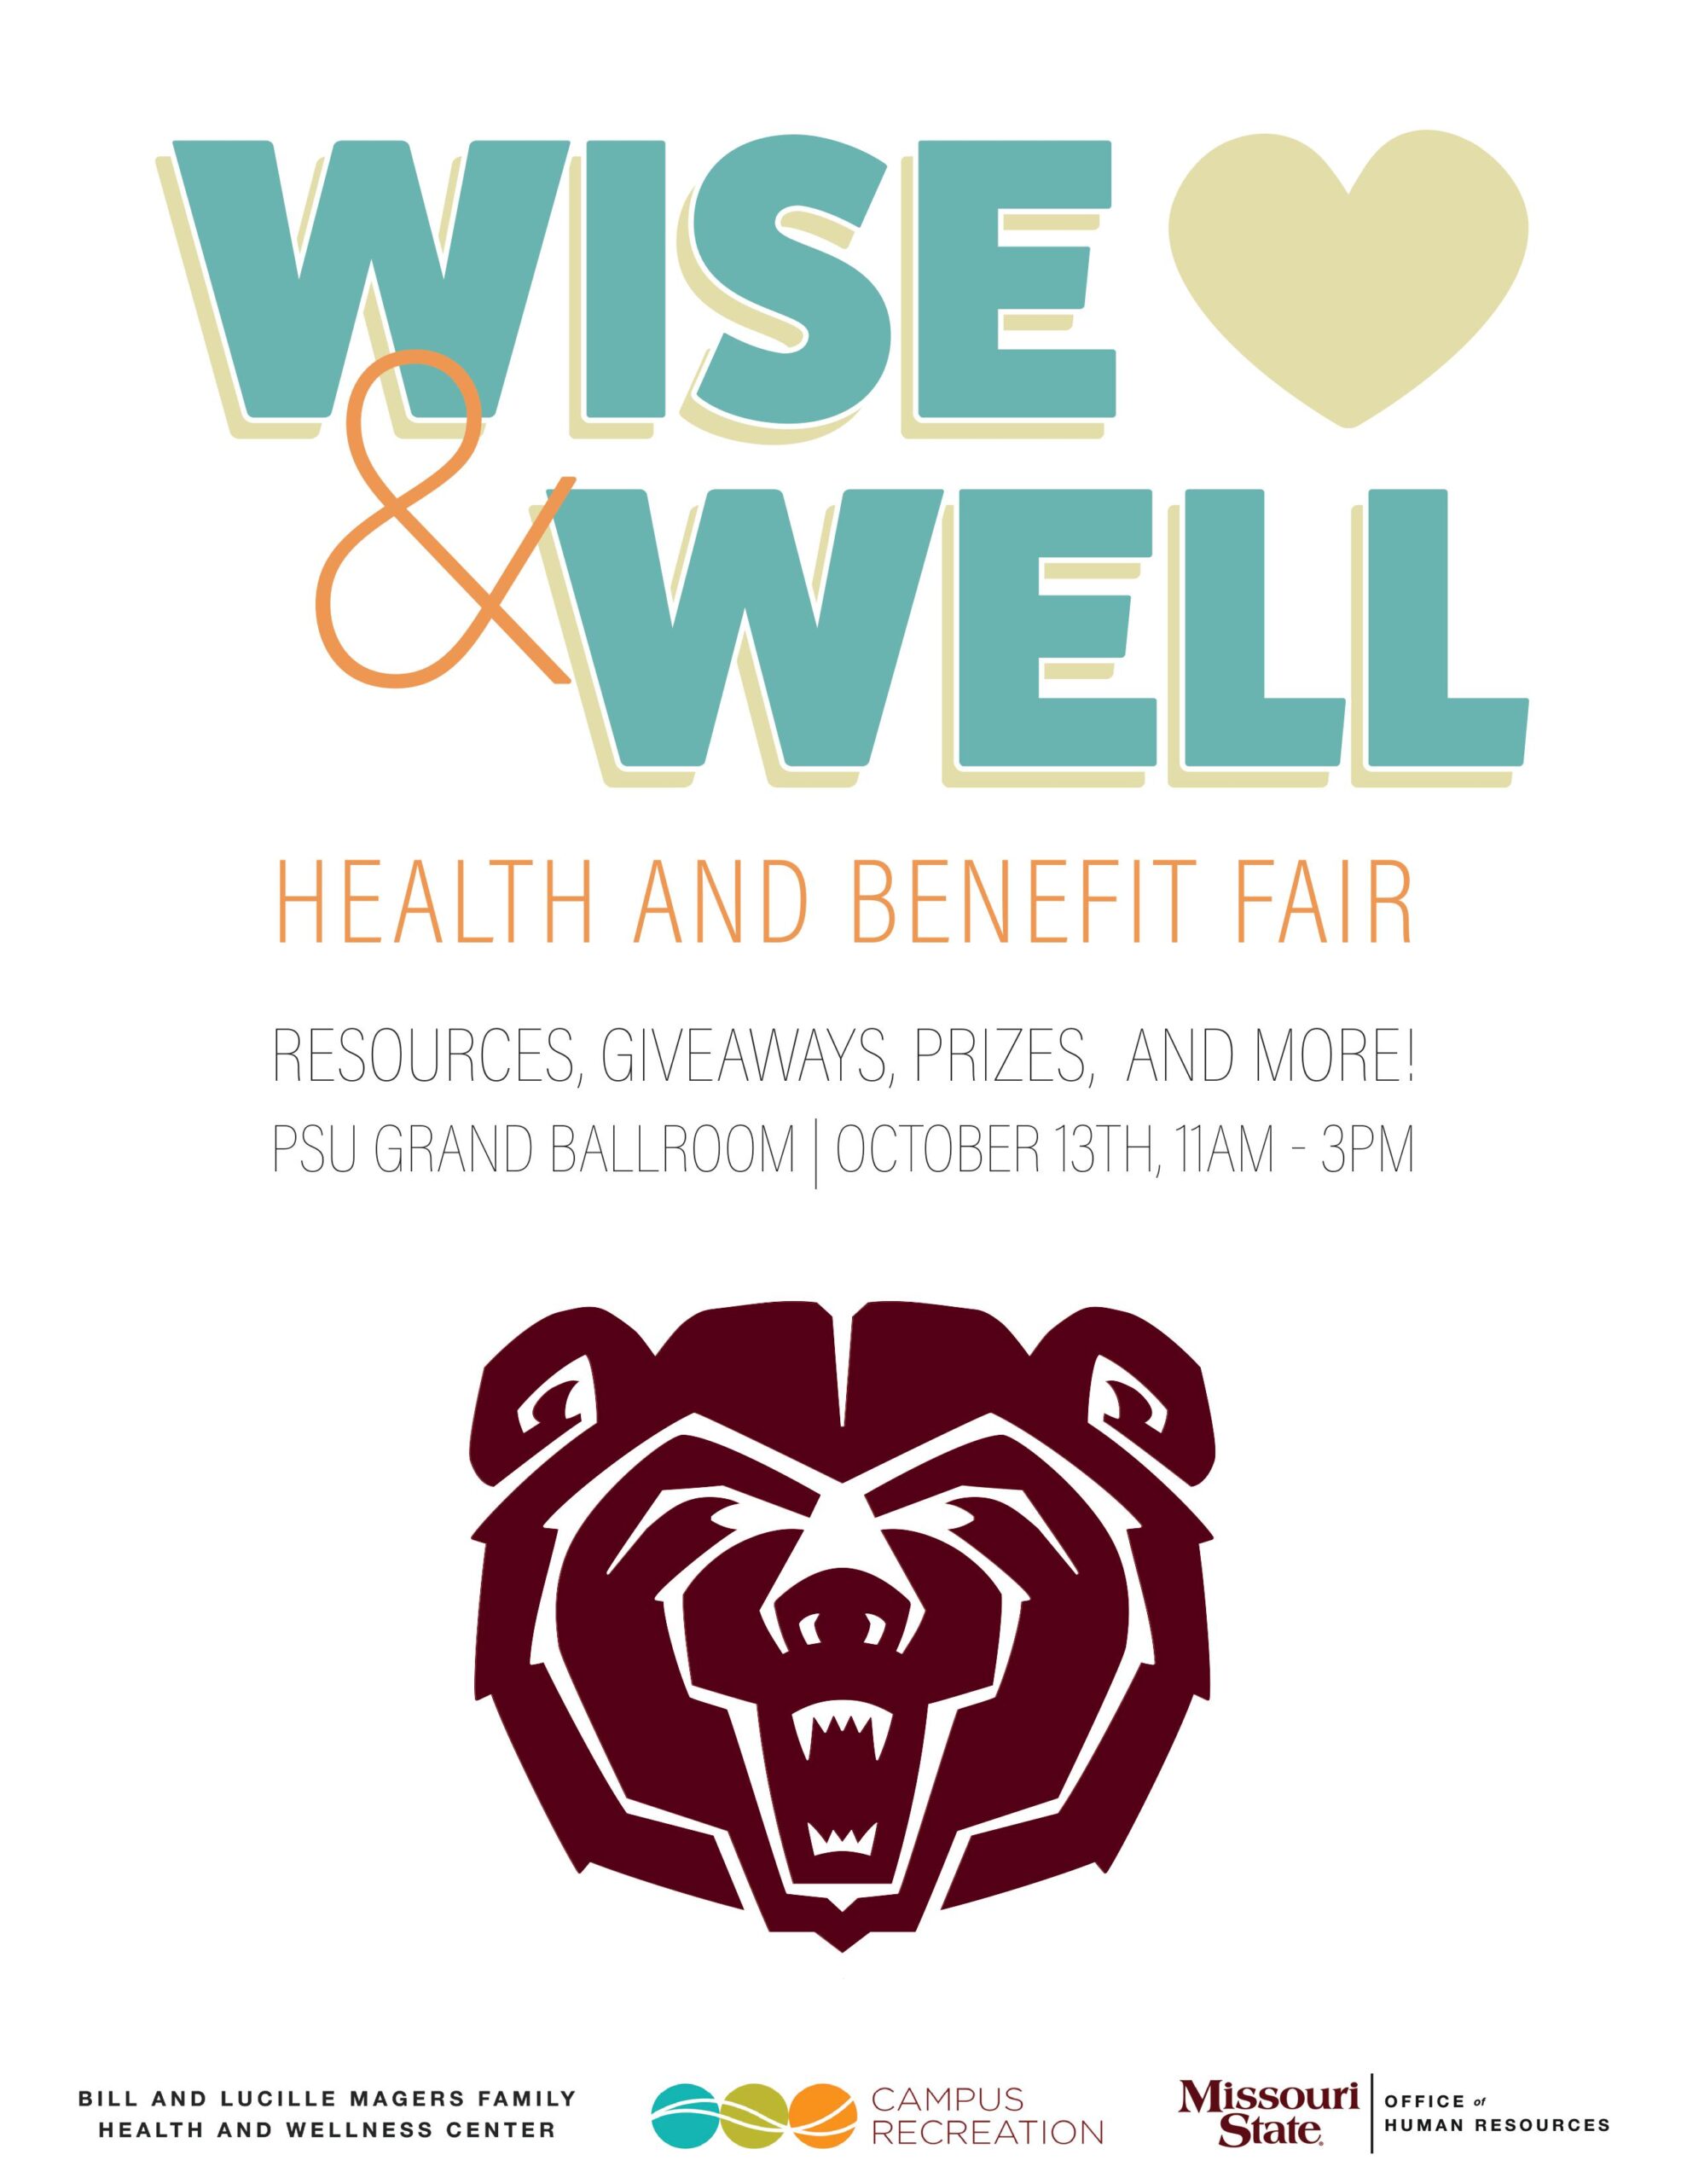 Resources, Giveaways, Prizes, and More! PSU Grand Ballroom, October 13, 11:00 AM to 3:00 PM